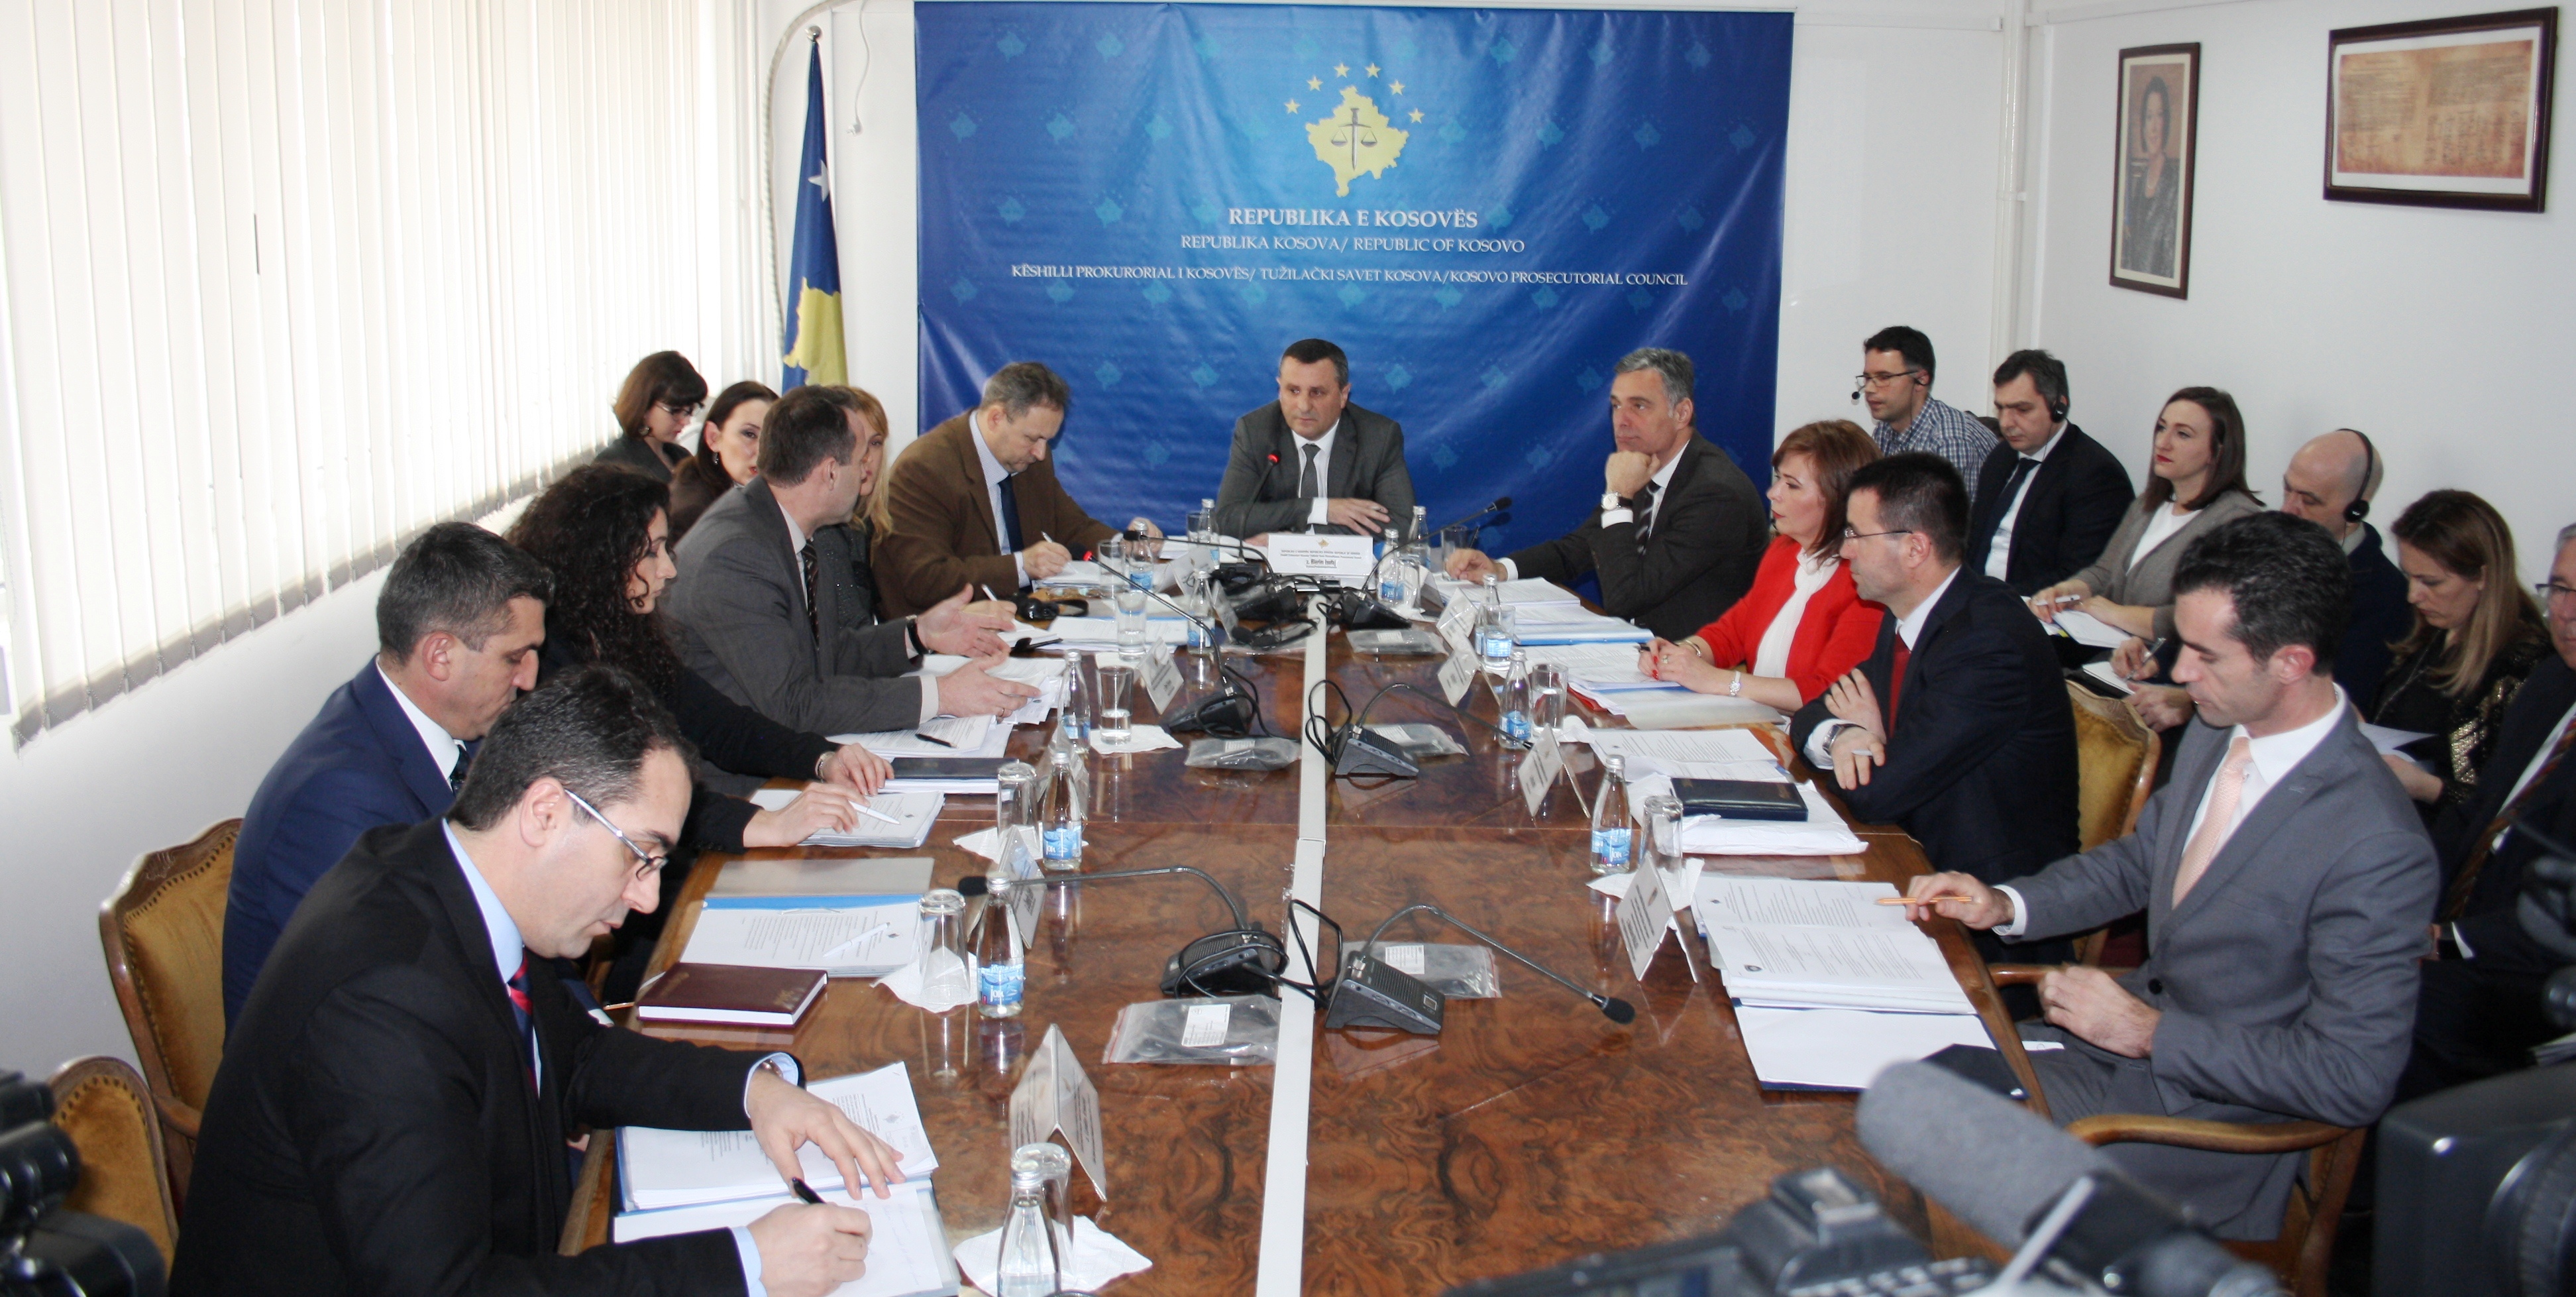 There was held the next meeting of Kosovo Prosecutorial Council